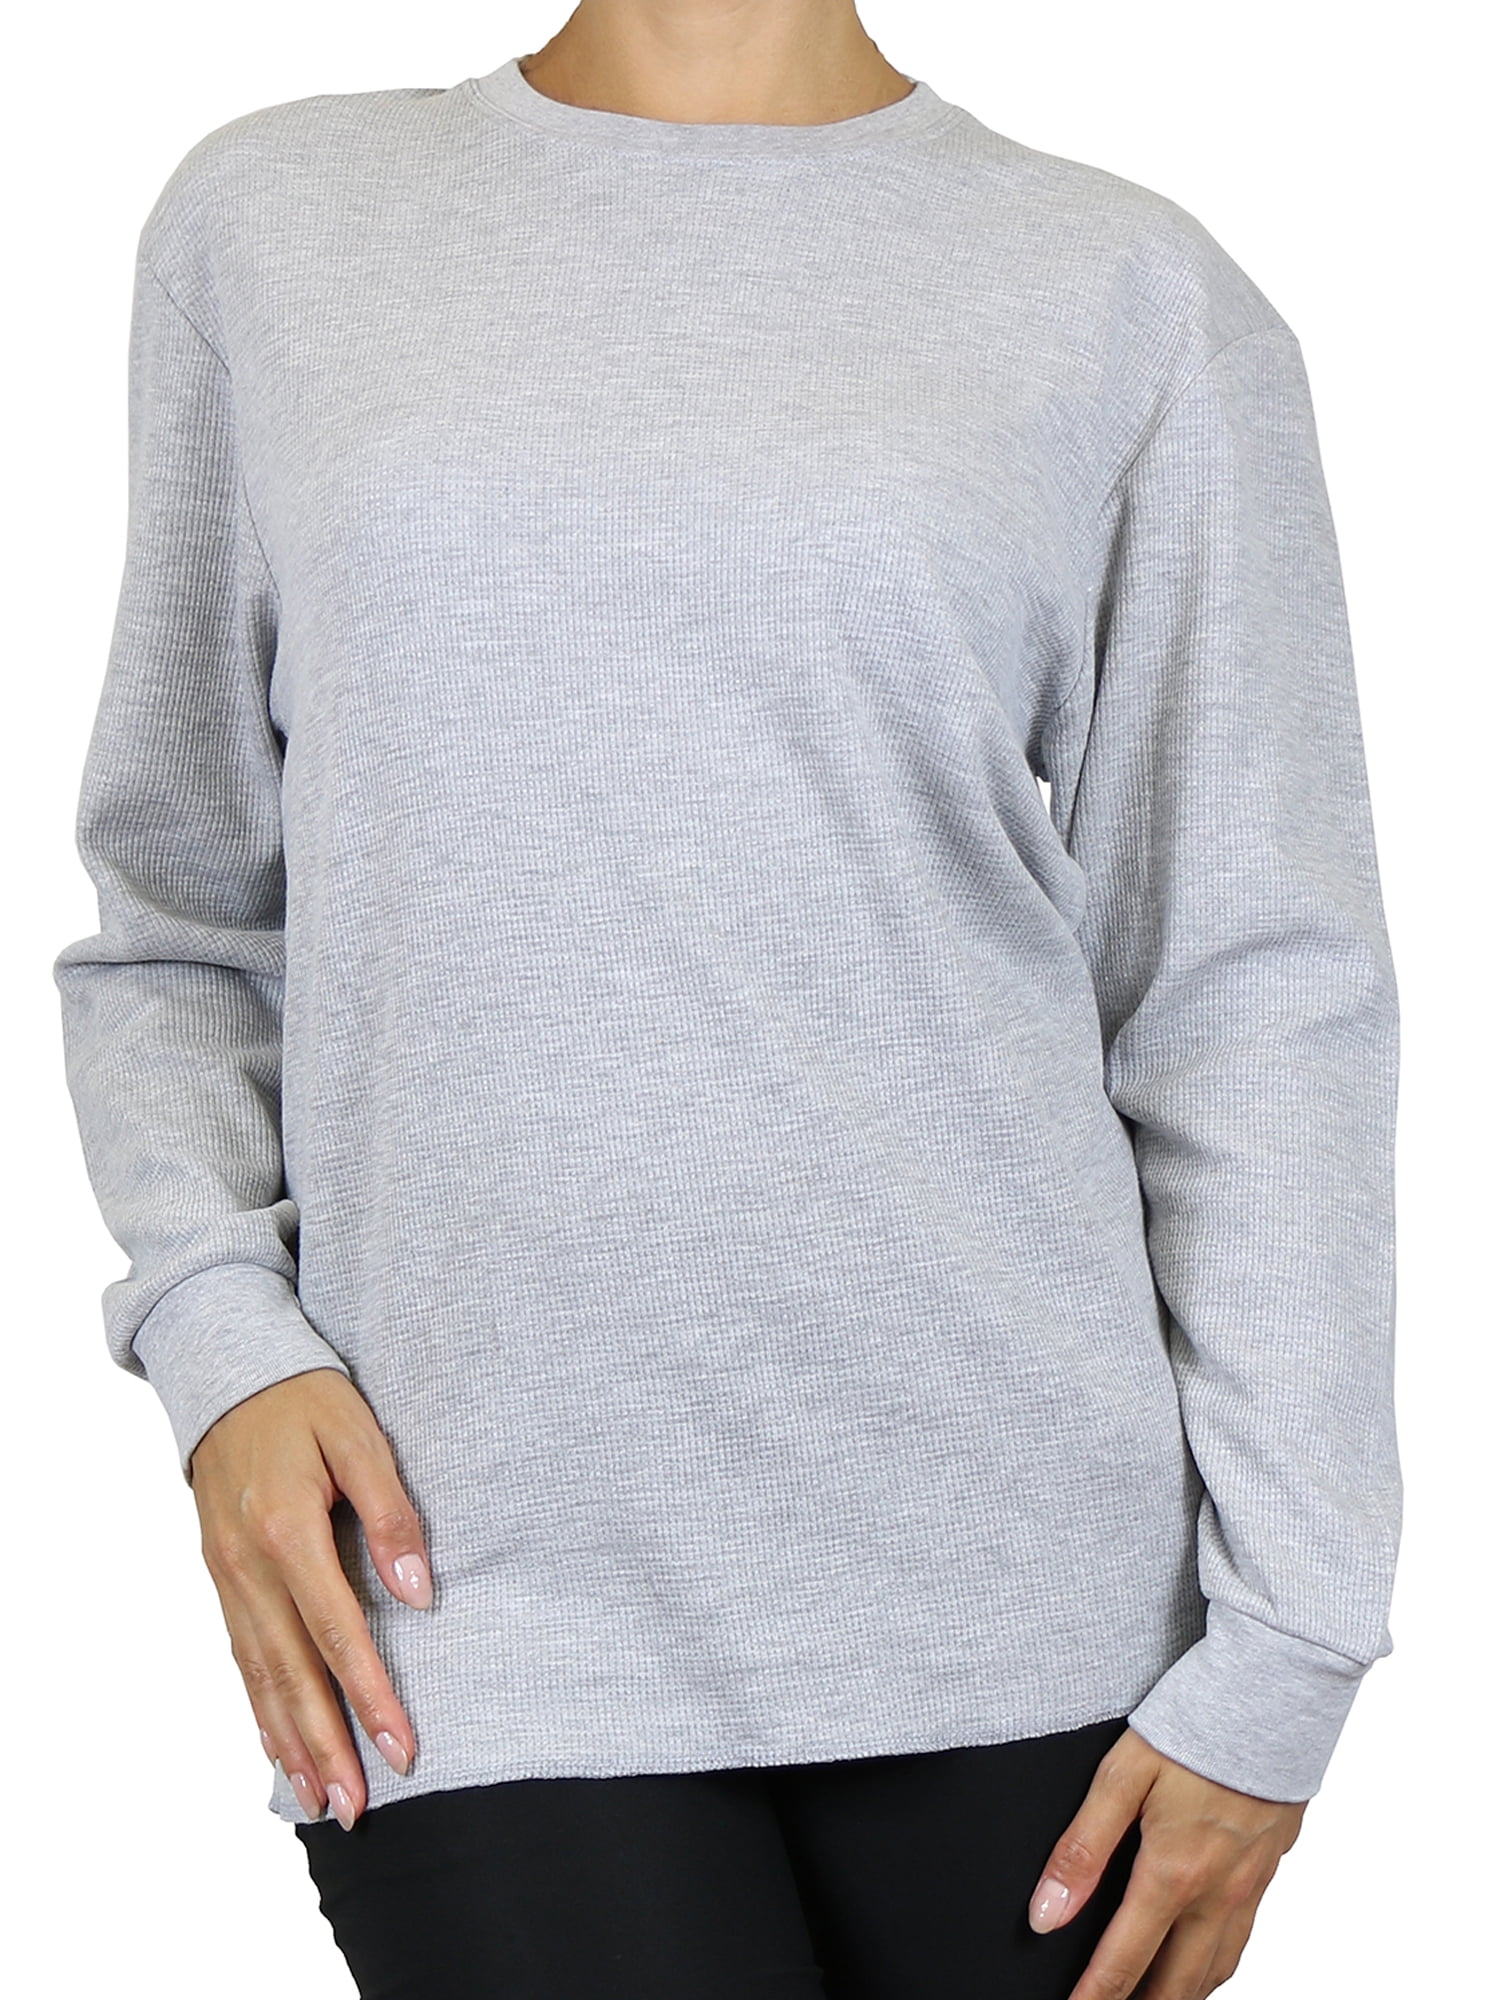 GBH Women's Loose Fit Crew Neck Waffle-Knit Thermal Shirt (S-2XL ...